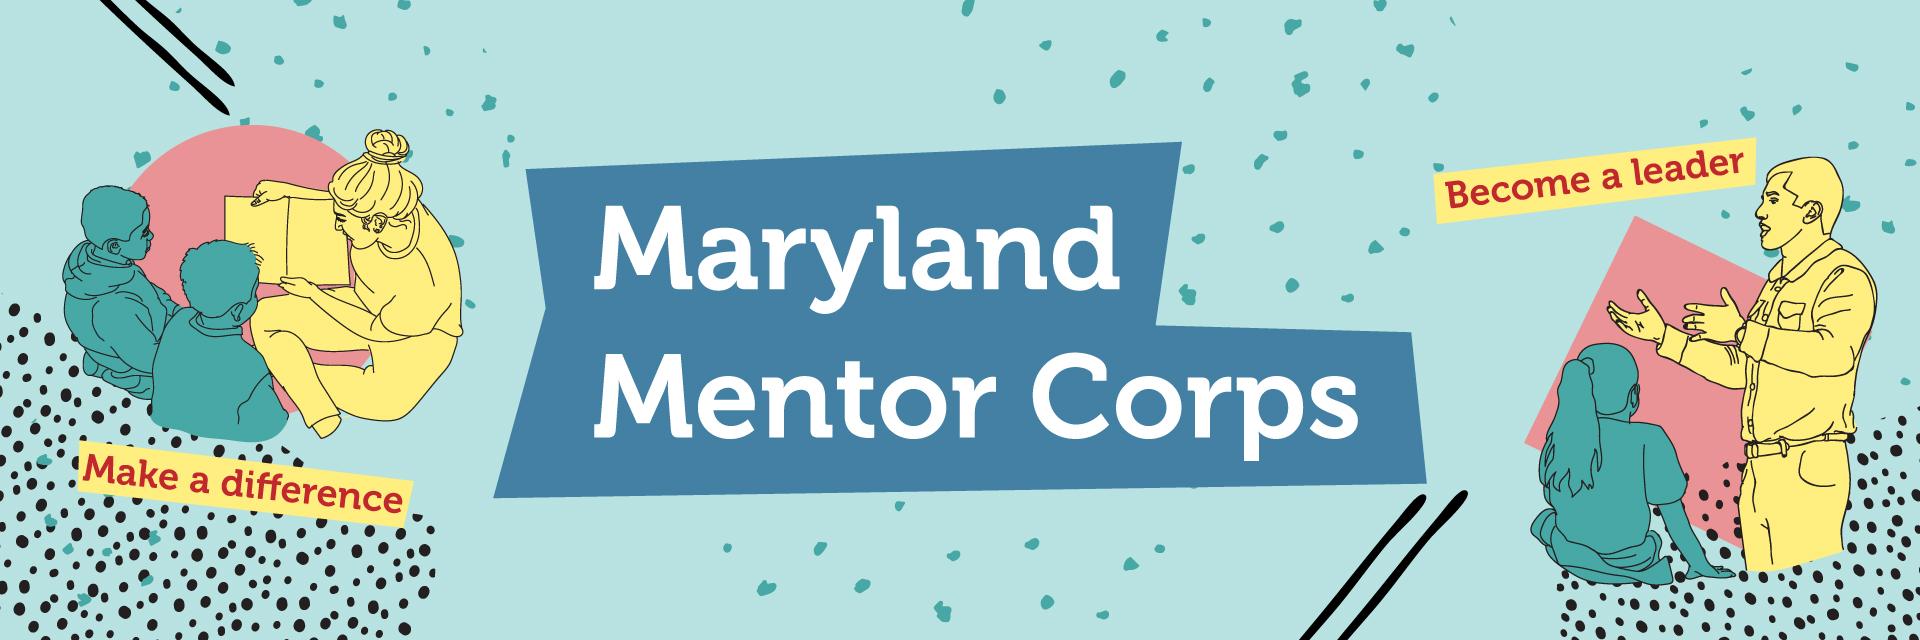 Maryland Mentor Corps at the University of Maryland